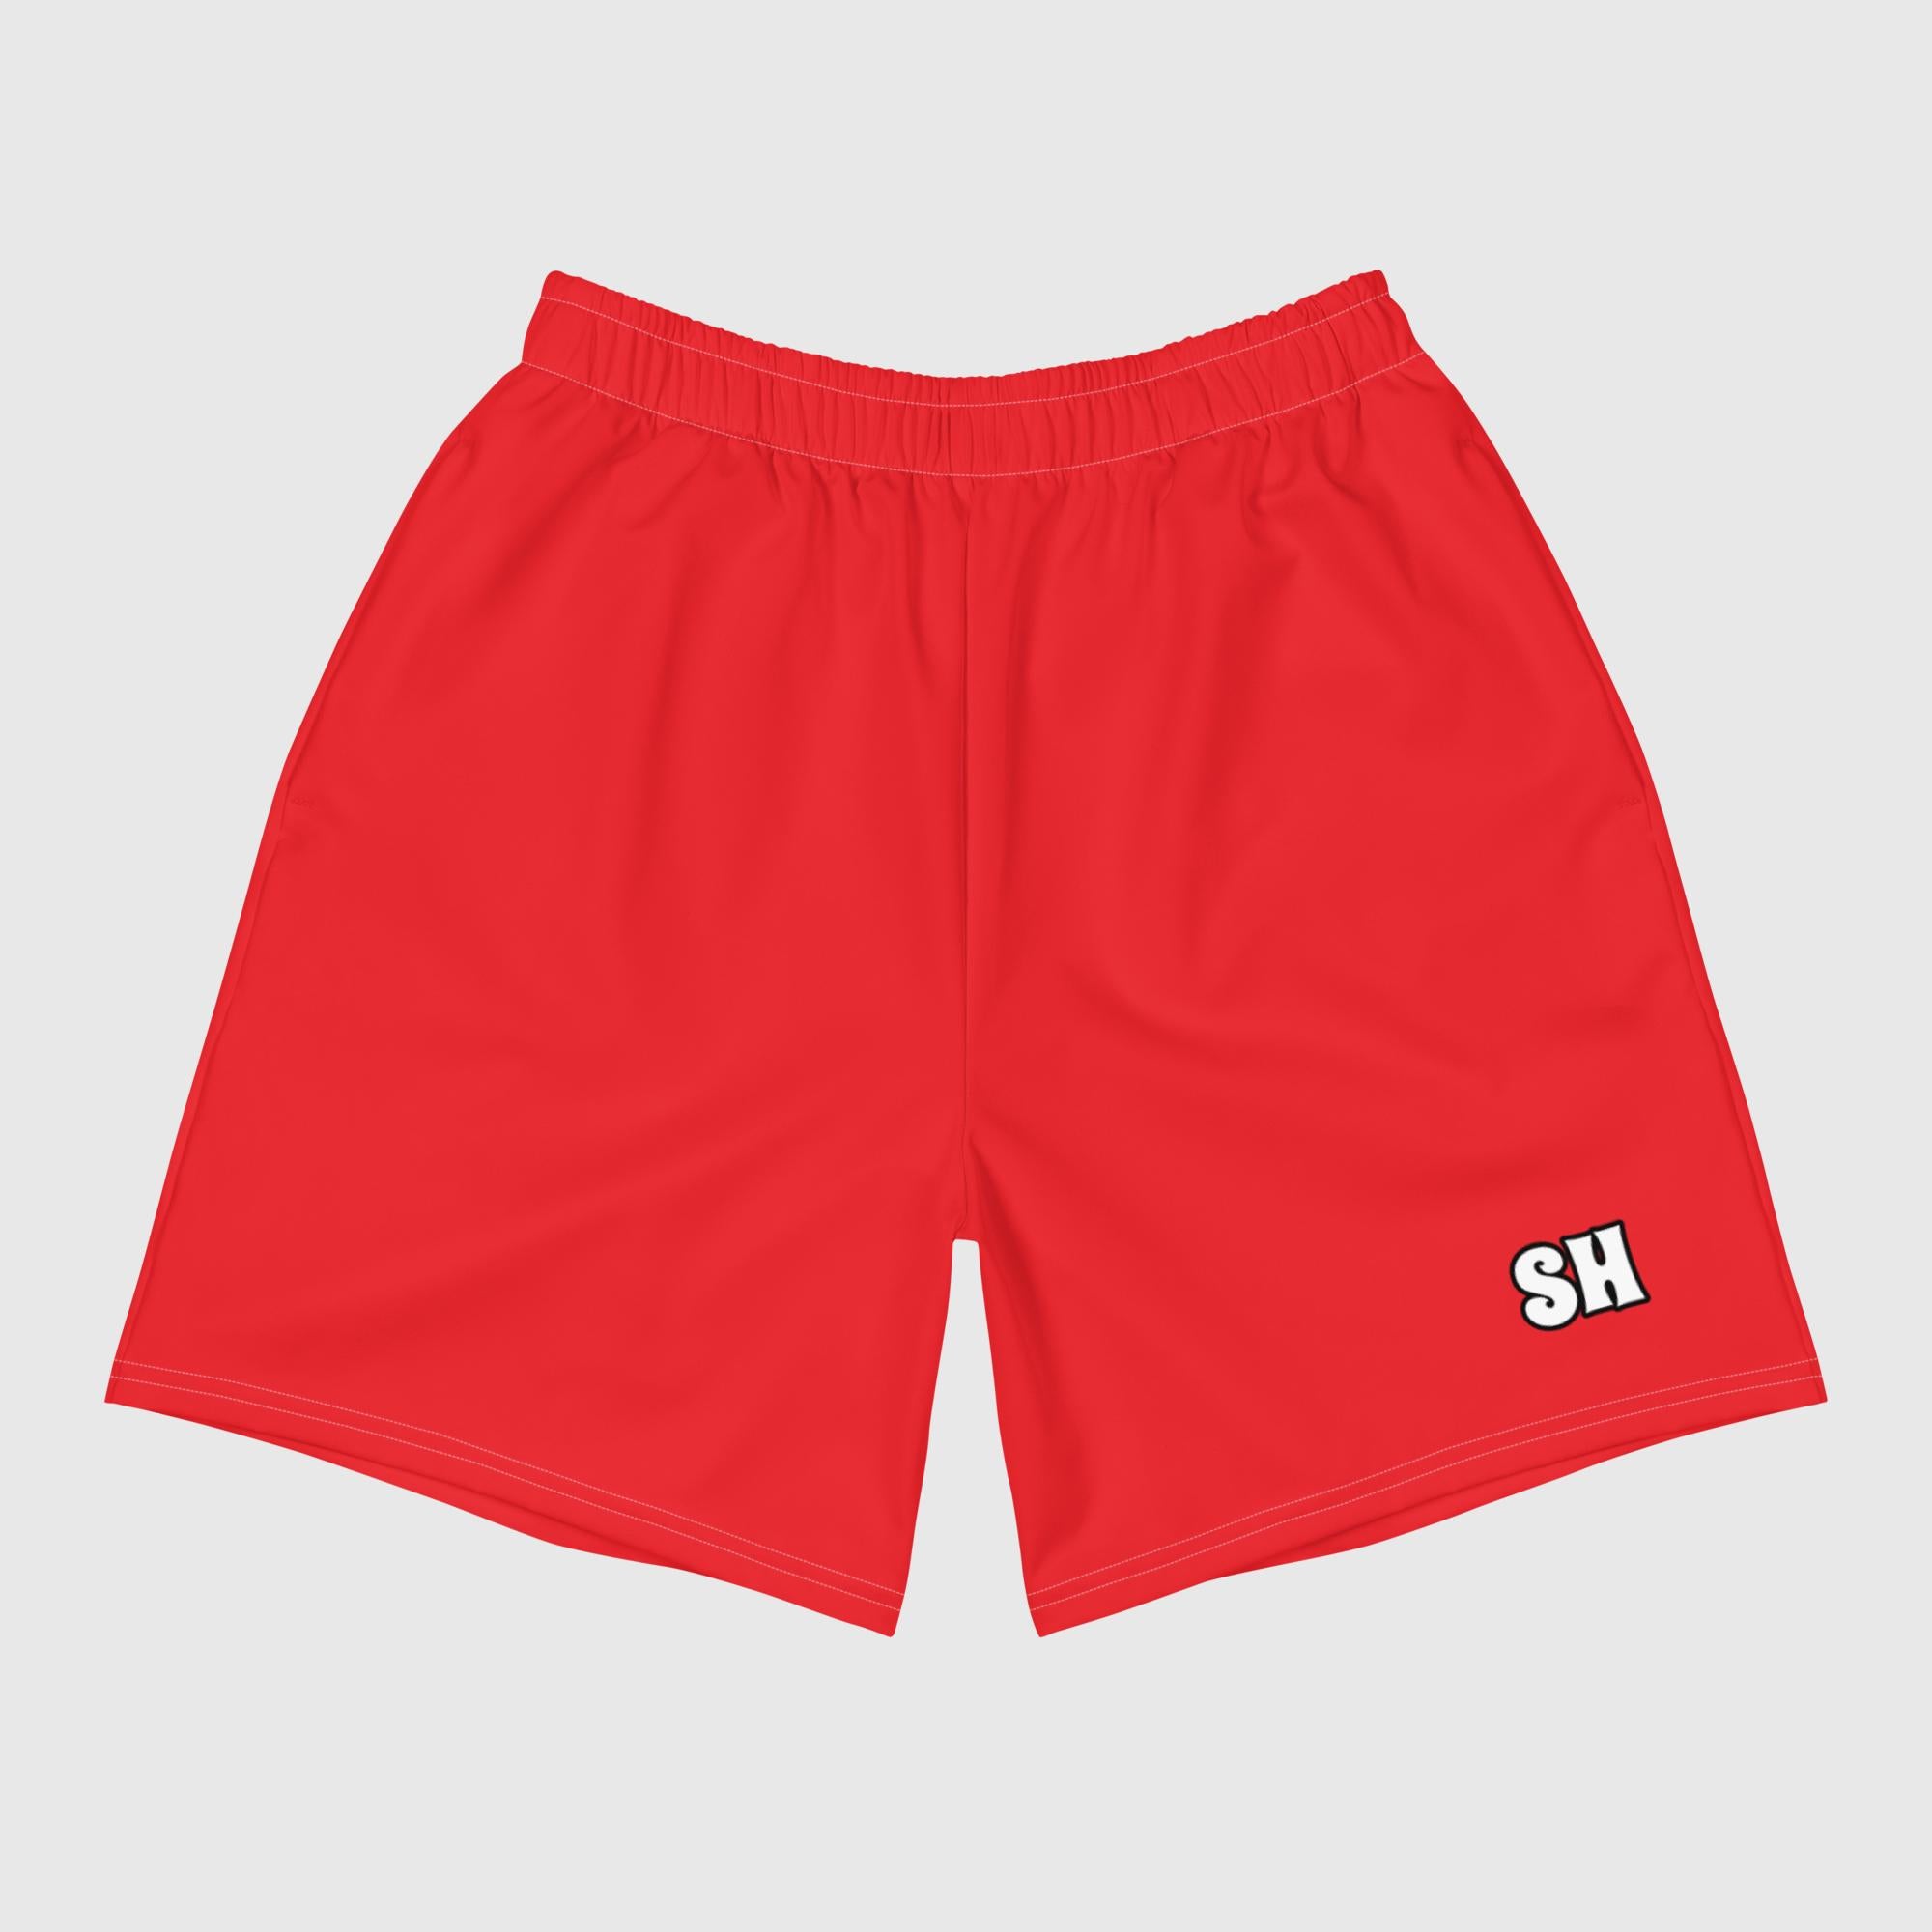 Men's Recycled Athletic Shorts - Red